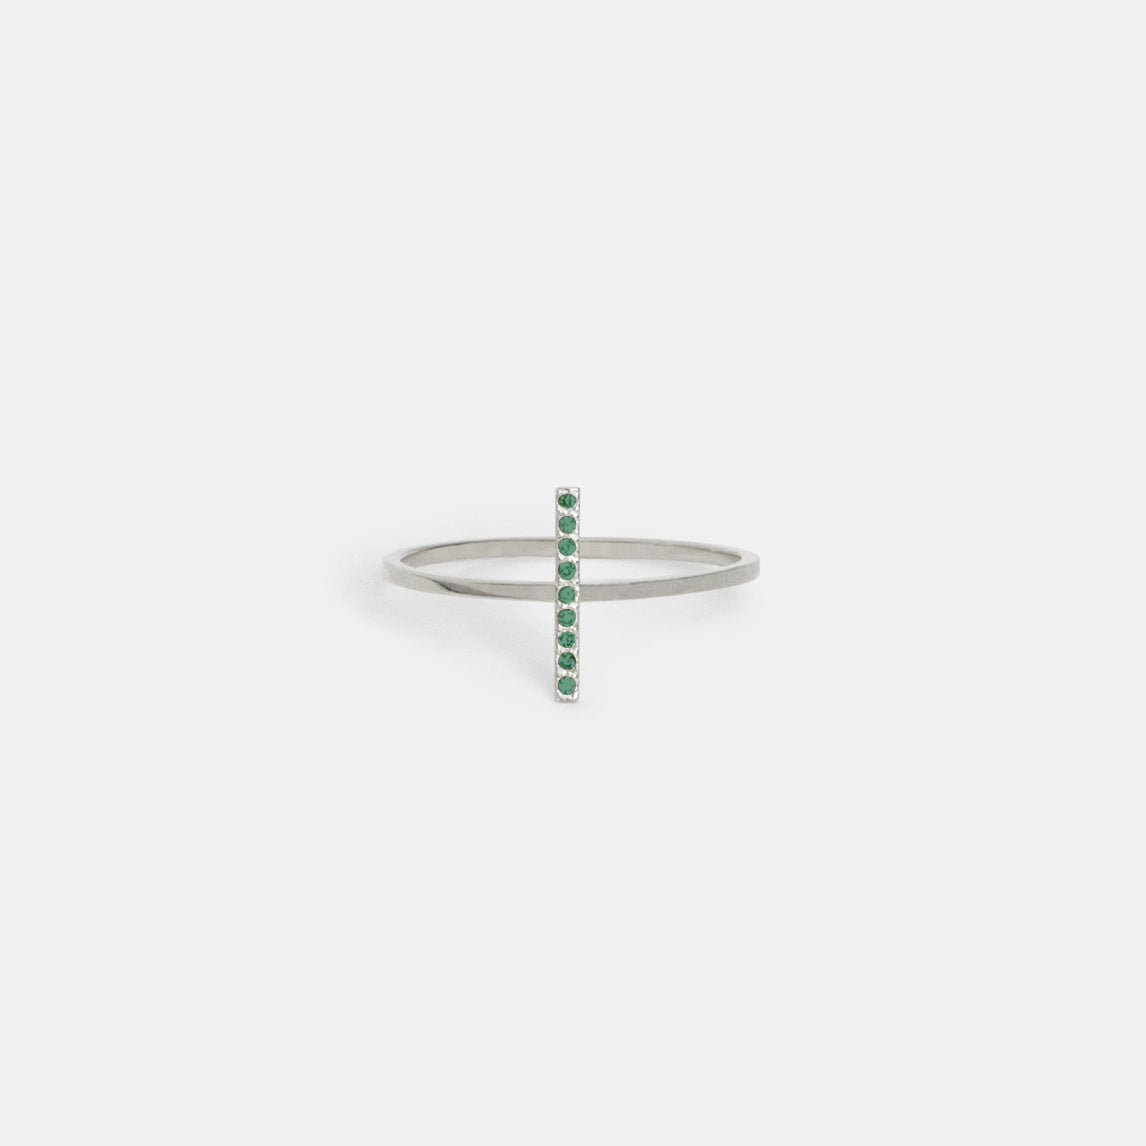 Steva Thin Ring in 14k White Gold set with Emeralds by SHW Fine Jewelry